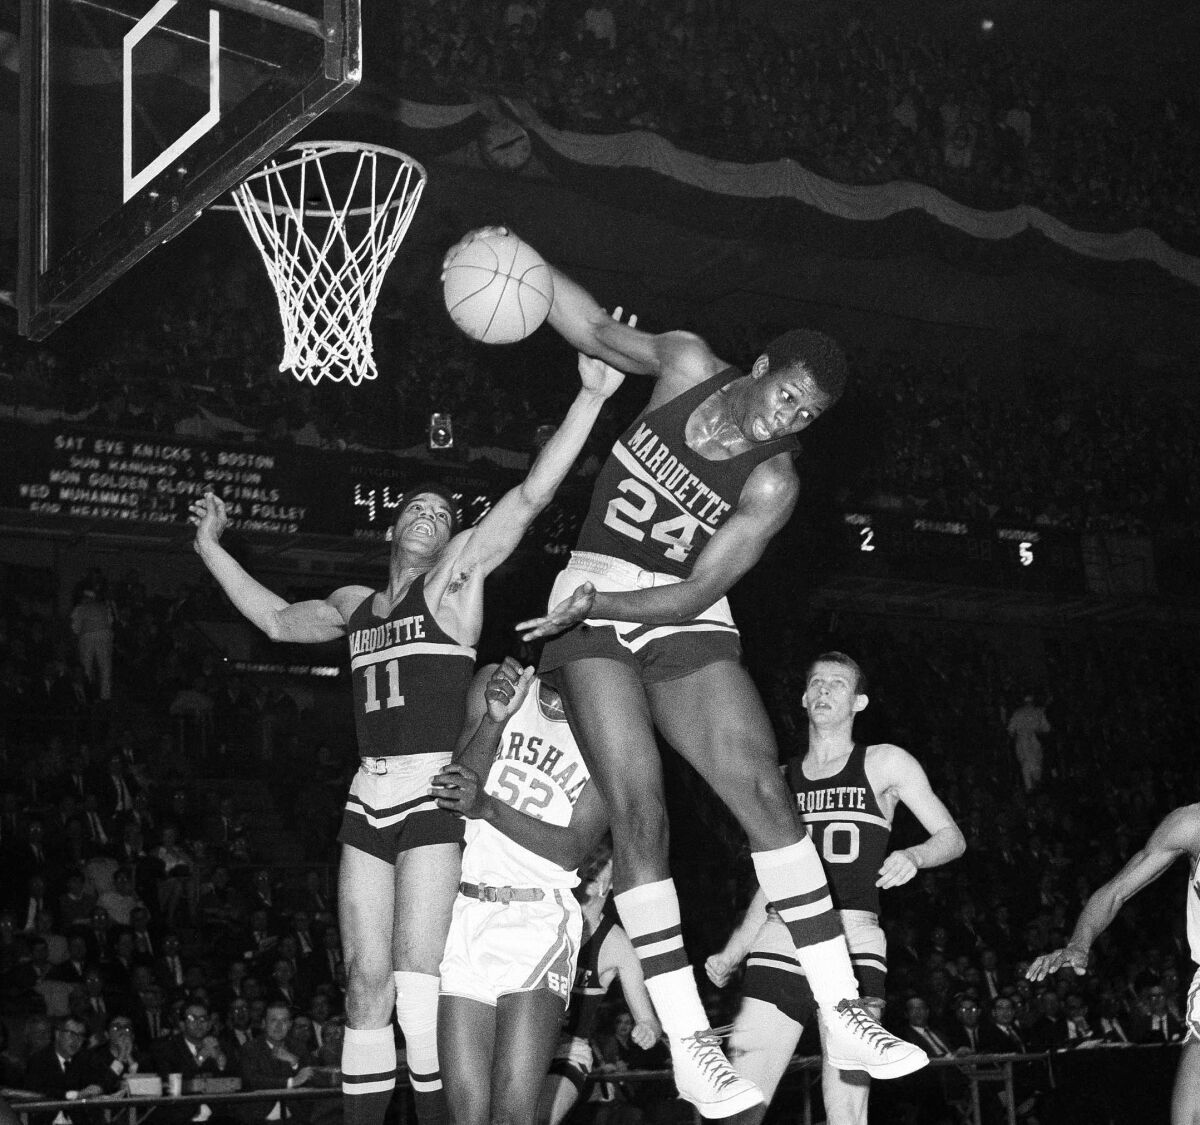 FILE - Teammates George Thompson (24) and Pat Smith (11) of Marquette leap for rebound in the first half of a college basketball against Marshall University at Madison Square Garden in New York, March 16, 1967. Thompson, who played for Marquette from 1967-69 and remains one of the program’s all-time leading scorers, has died. He was 74. Marquette announced Thompson died Wednesday, June 8, 2022 at his Milwaukee home due to complications from diabetes. (AP Photo)